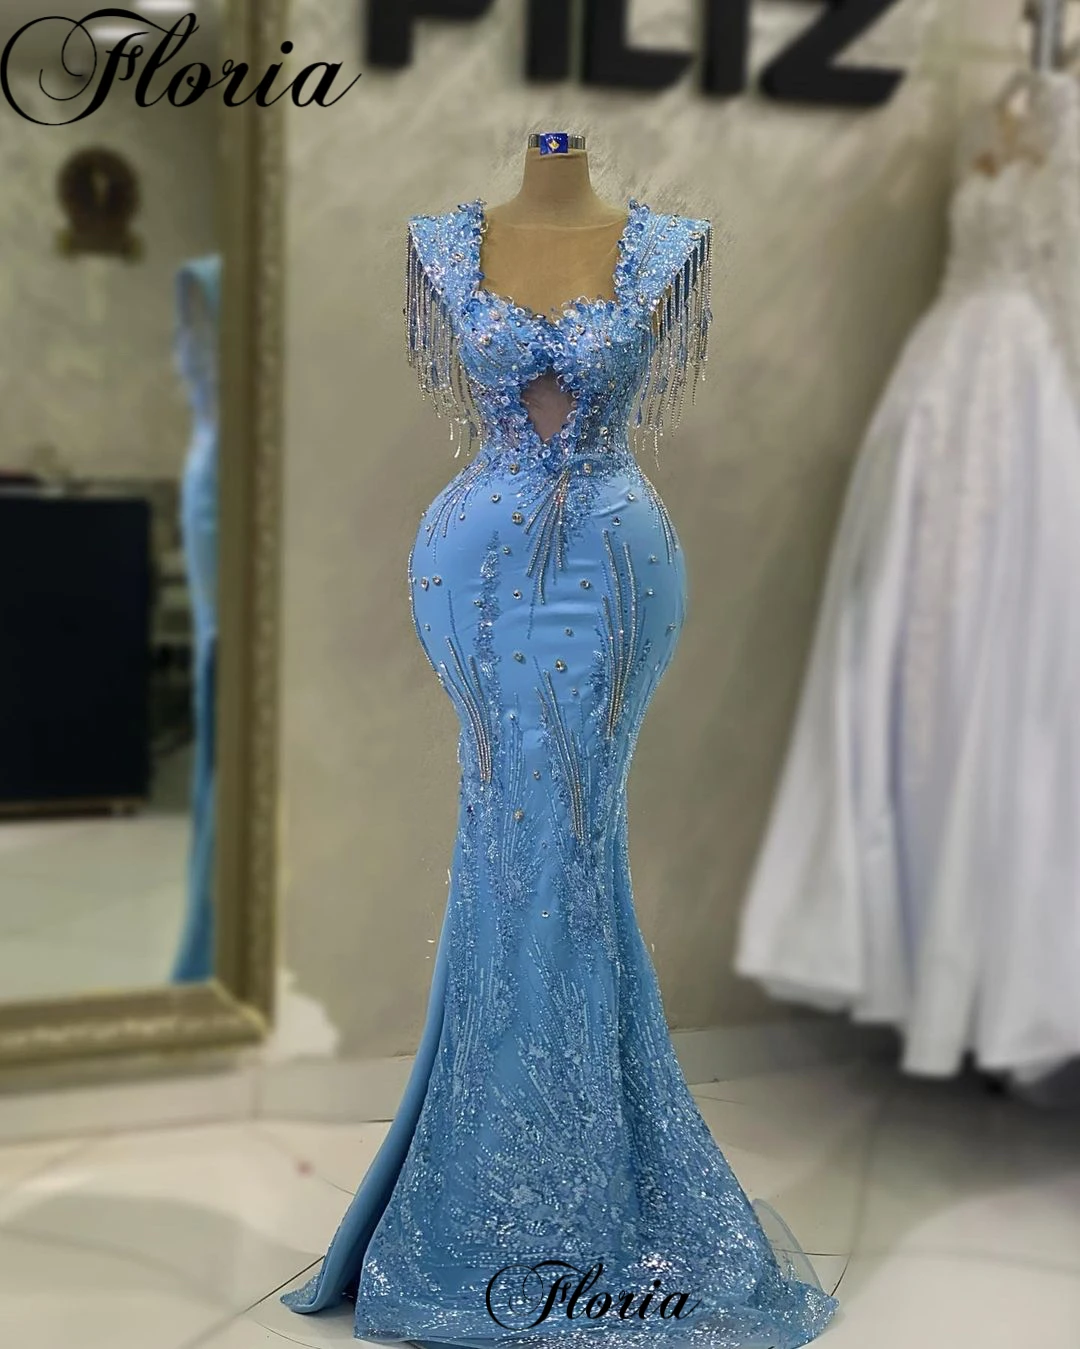 Blue Mermaid Evening Dresses With Crystals Sleeveless Designed Prom Dresses Turkish Coutures Pageant Gowns Robes De Soirée